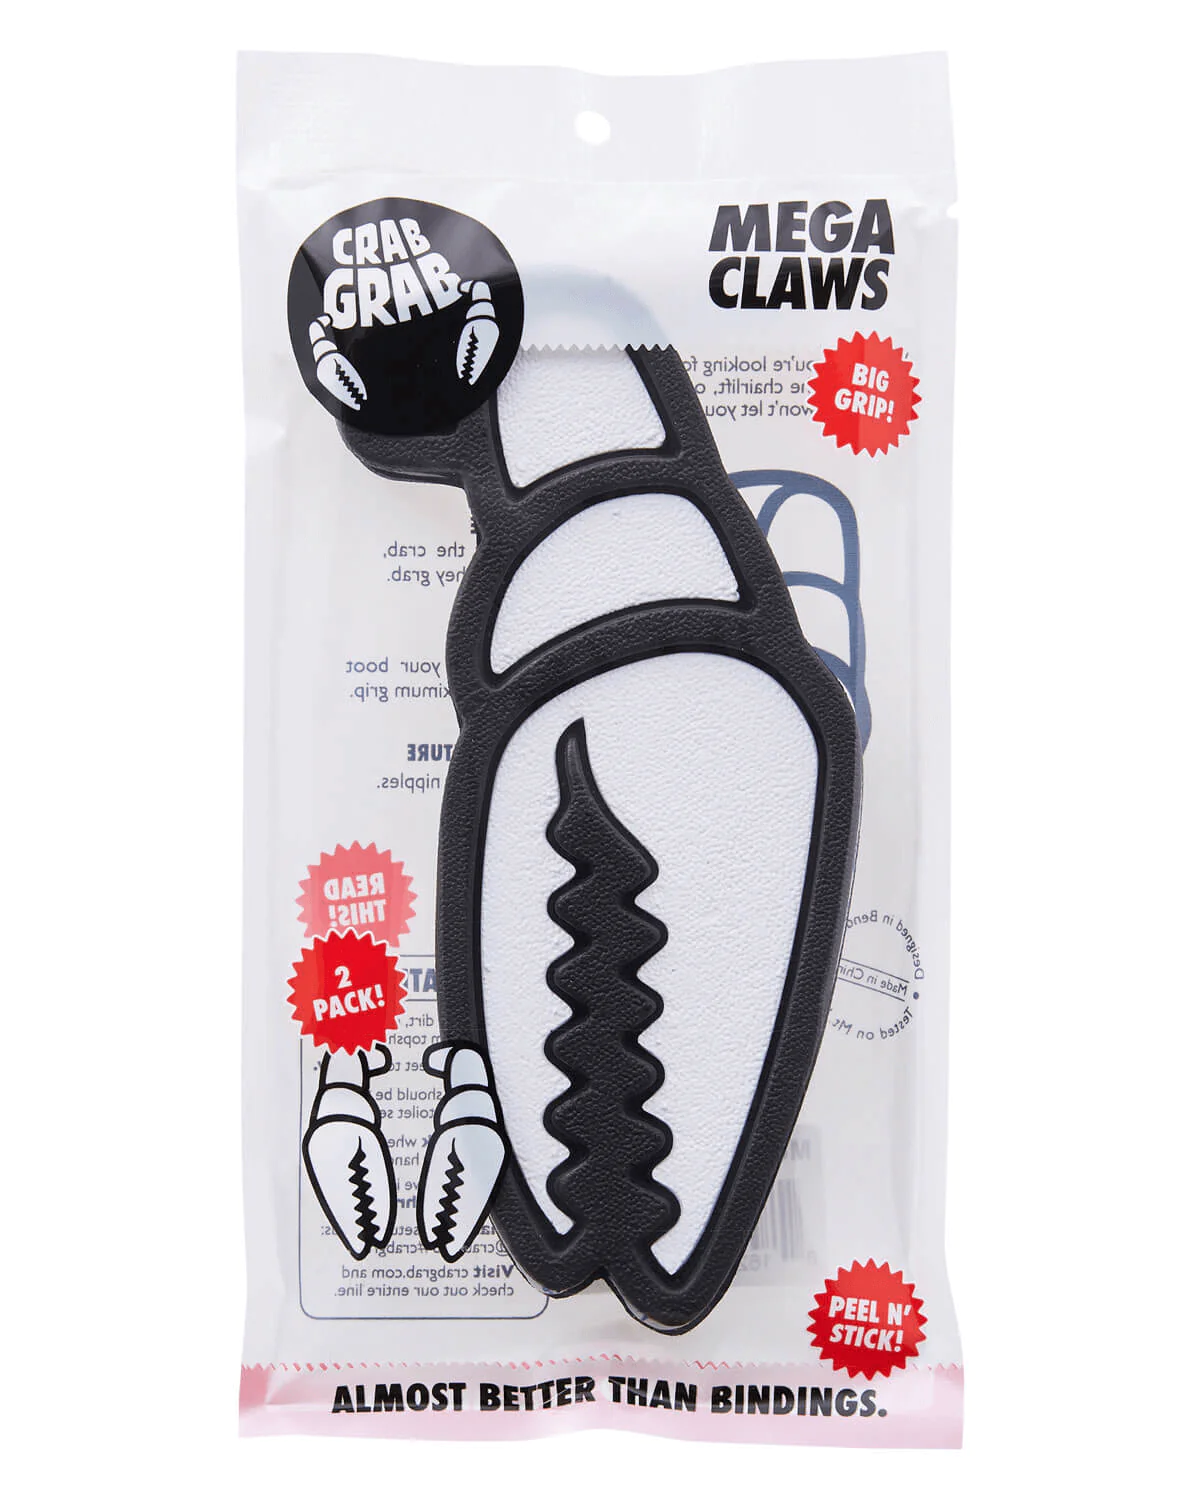 FA20_crab_grab_snowboard_traction_mega_claws_white_pkg_front_5000x